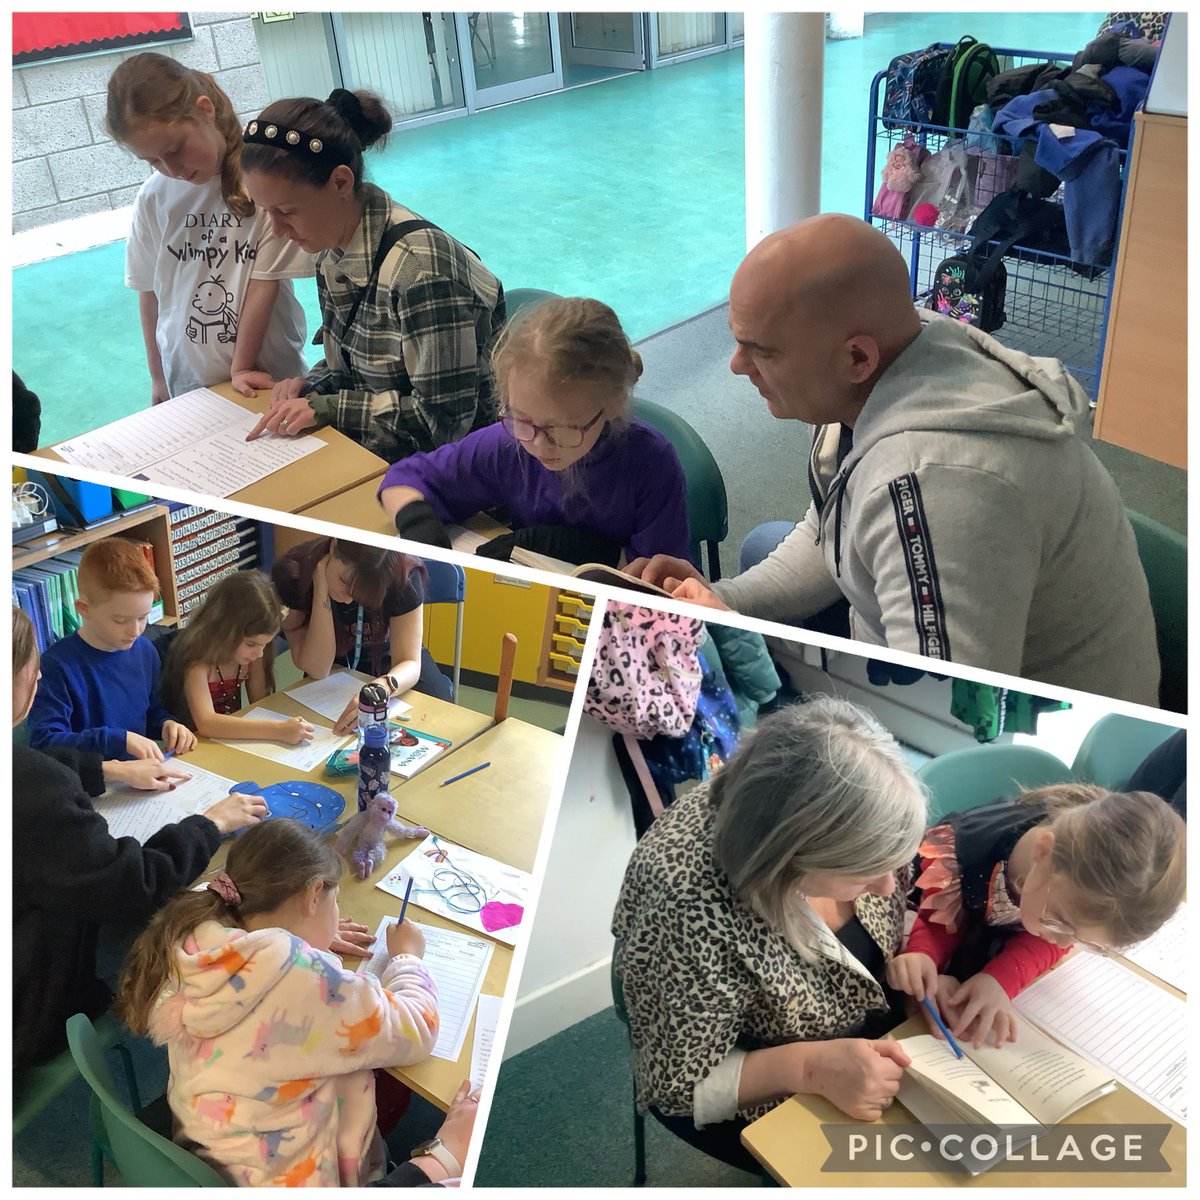 We really enjoyed having our parents in class this morning to ‘Share our Learning’ - we completed a #ReflectiveReading Short Read Blankety Blank focused on our class novel The Owl Who Was Afraid Of The Dark! It was great to show off all of our reading skills! #parentalengagement